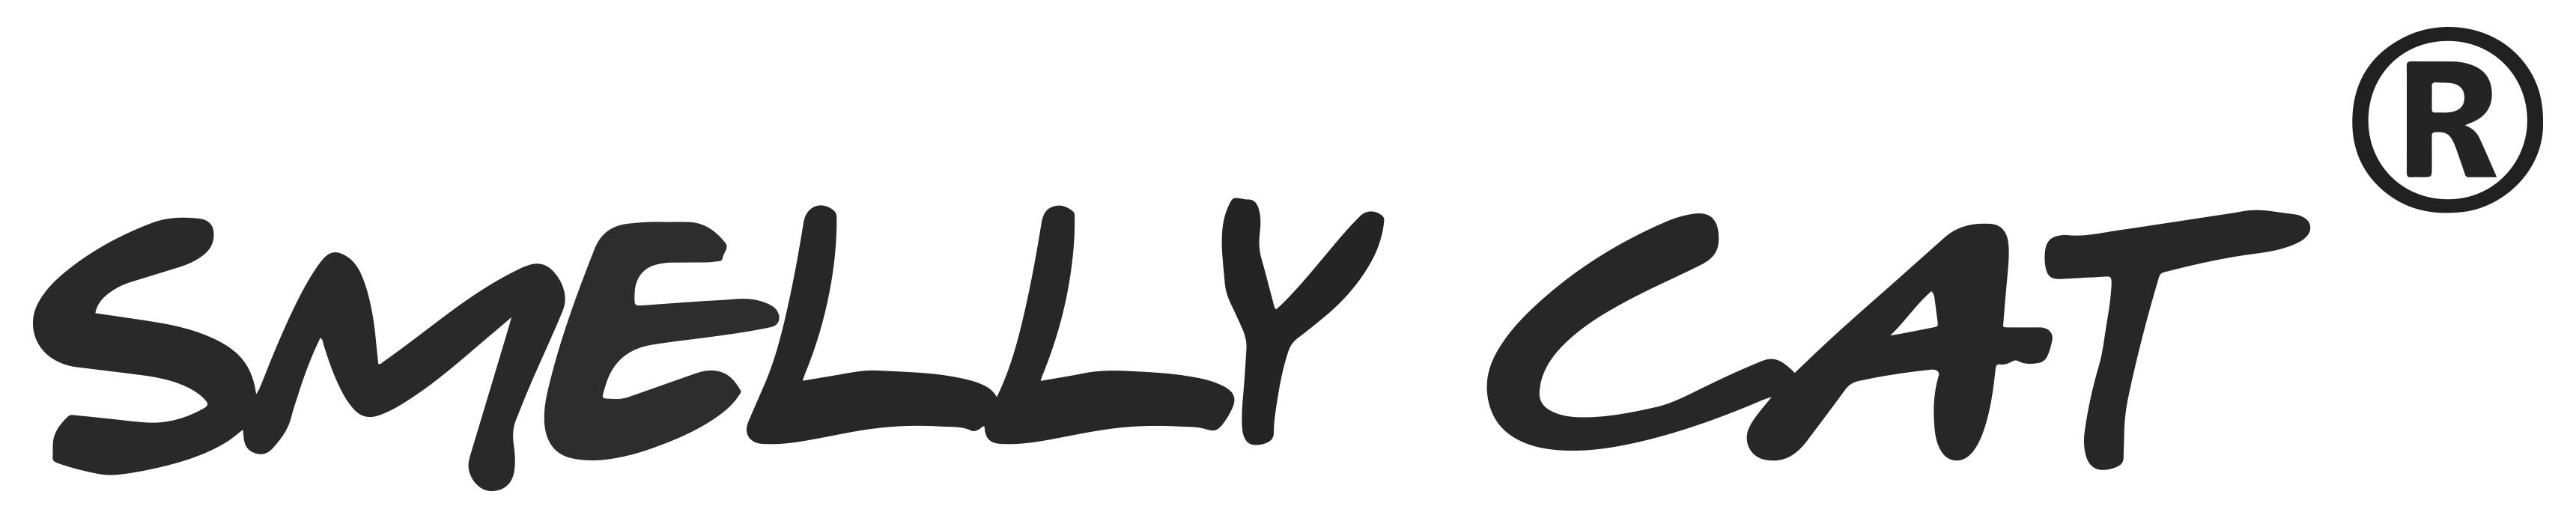 Smelly cat and smelly cat logo_transparent_cropped